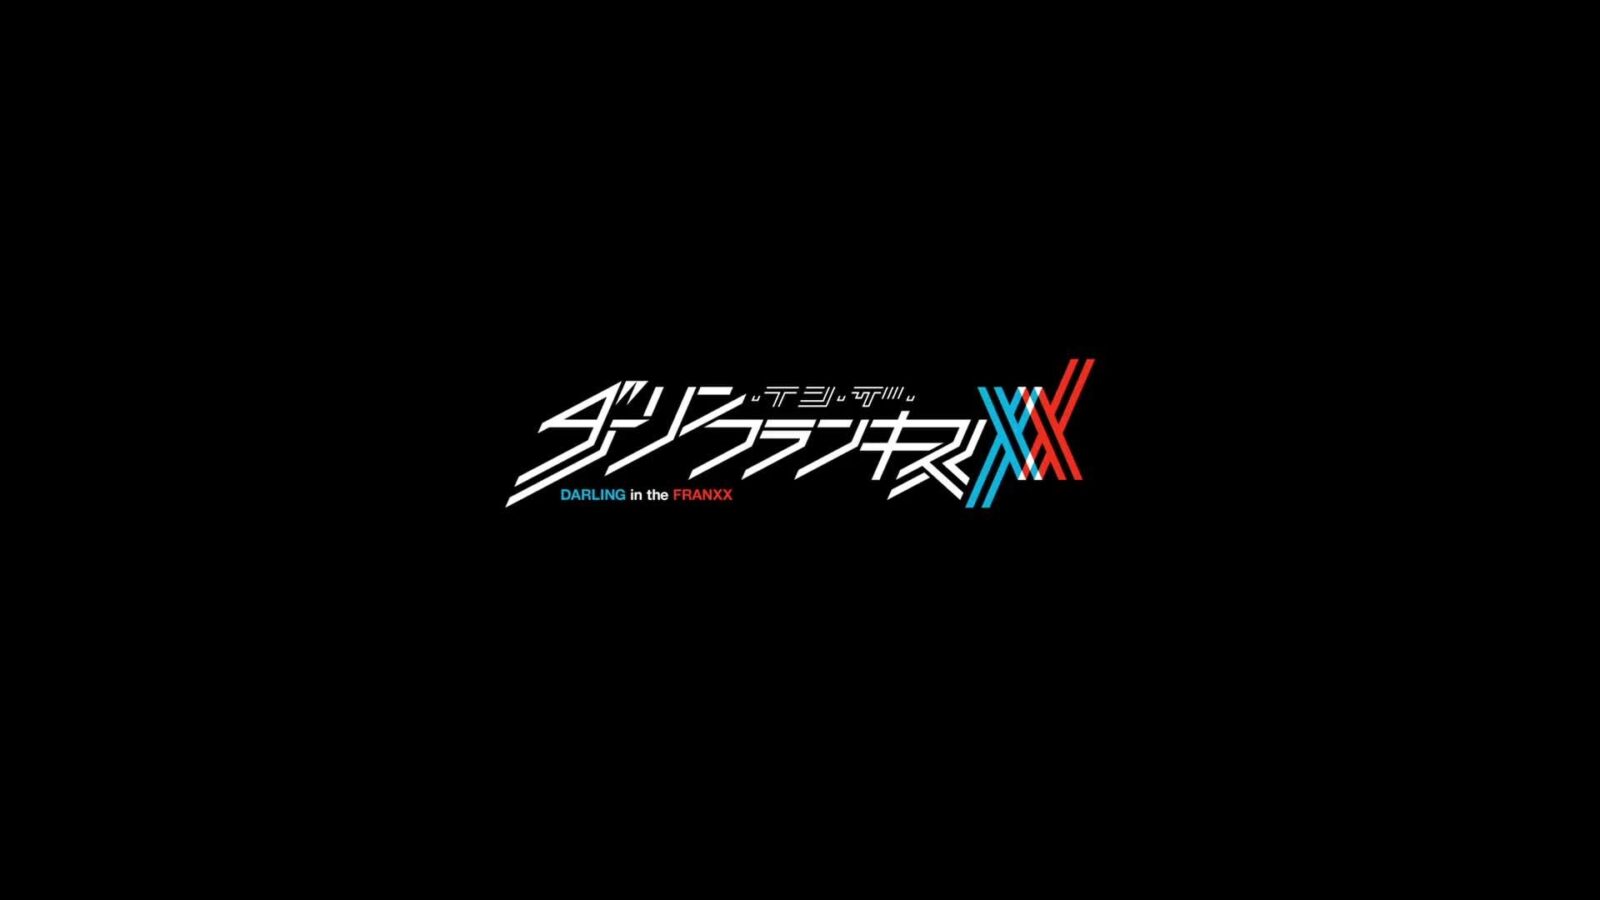 LiveWallpapers4Free.com | Darling In The Franxx Full Intro - Animated Live Wallpaper